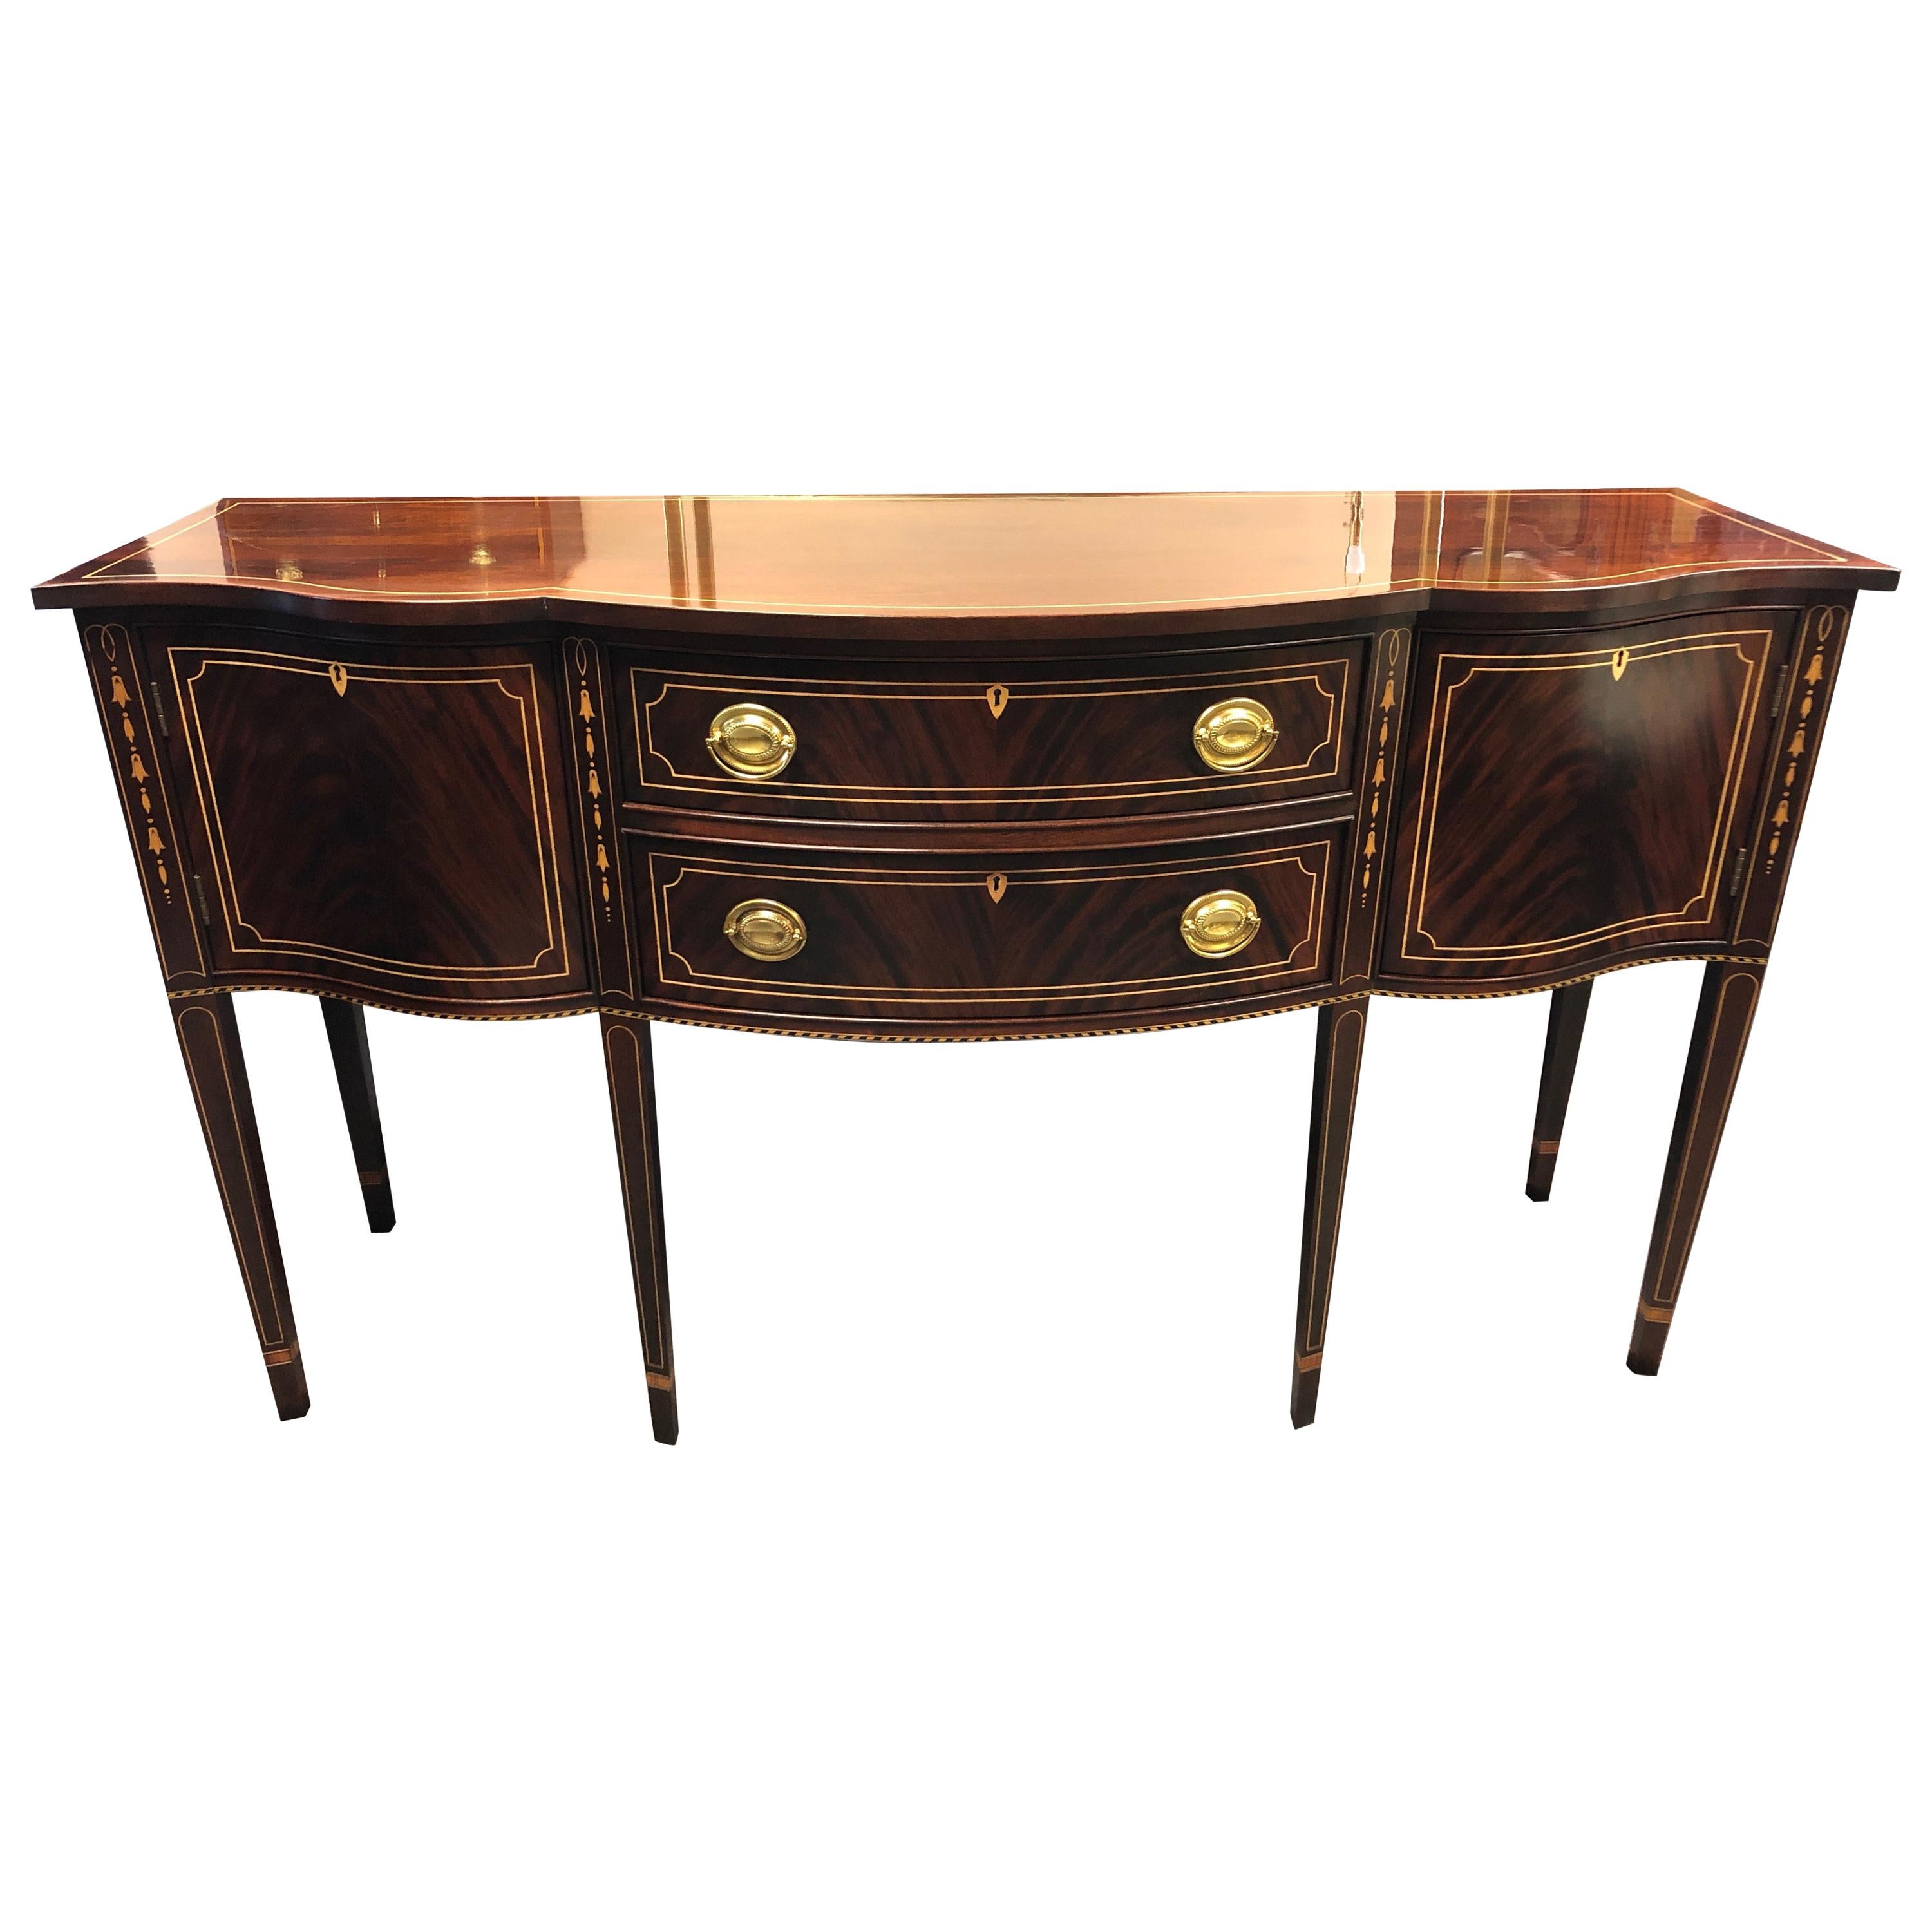 Magnificent Mahogany Stickley Serpentine Sideboard with Satinwood Inlay